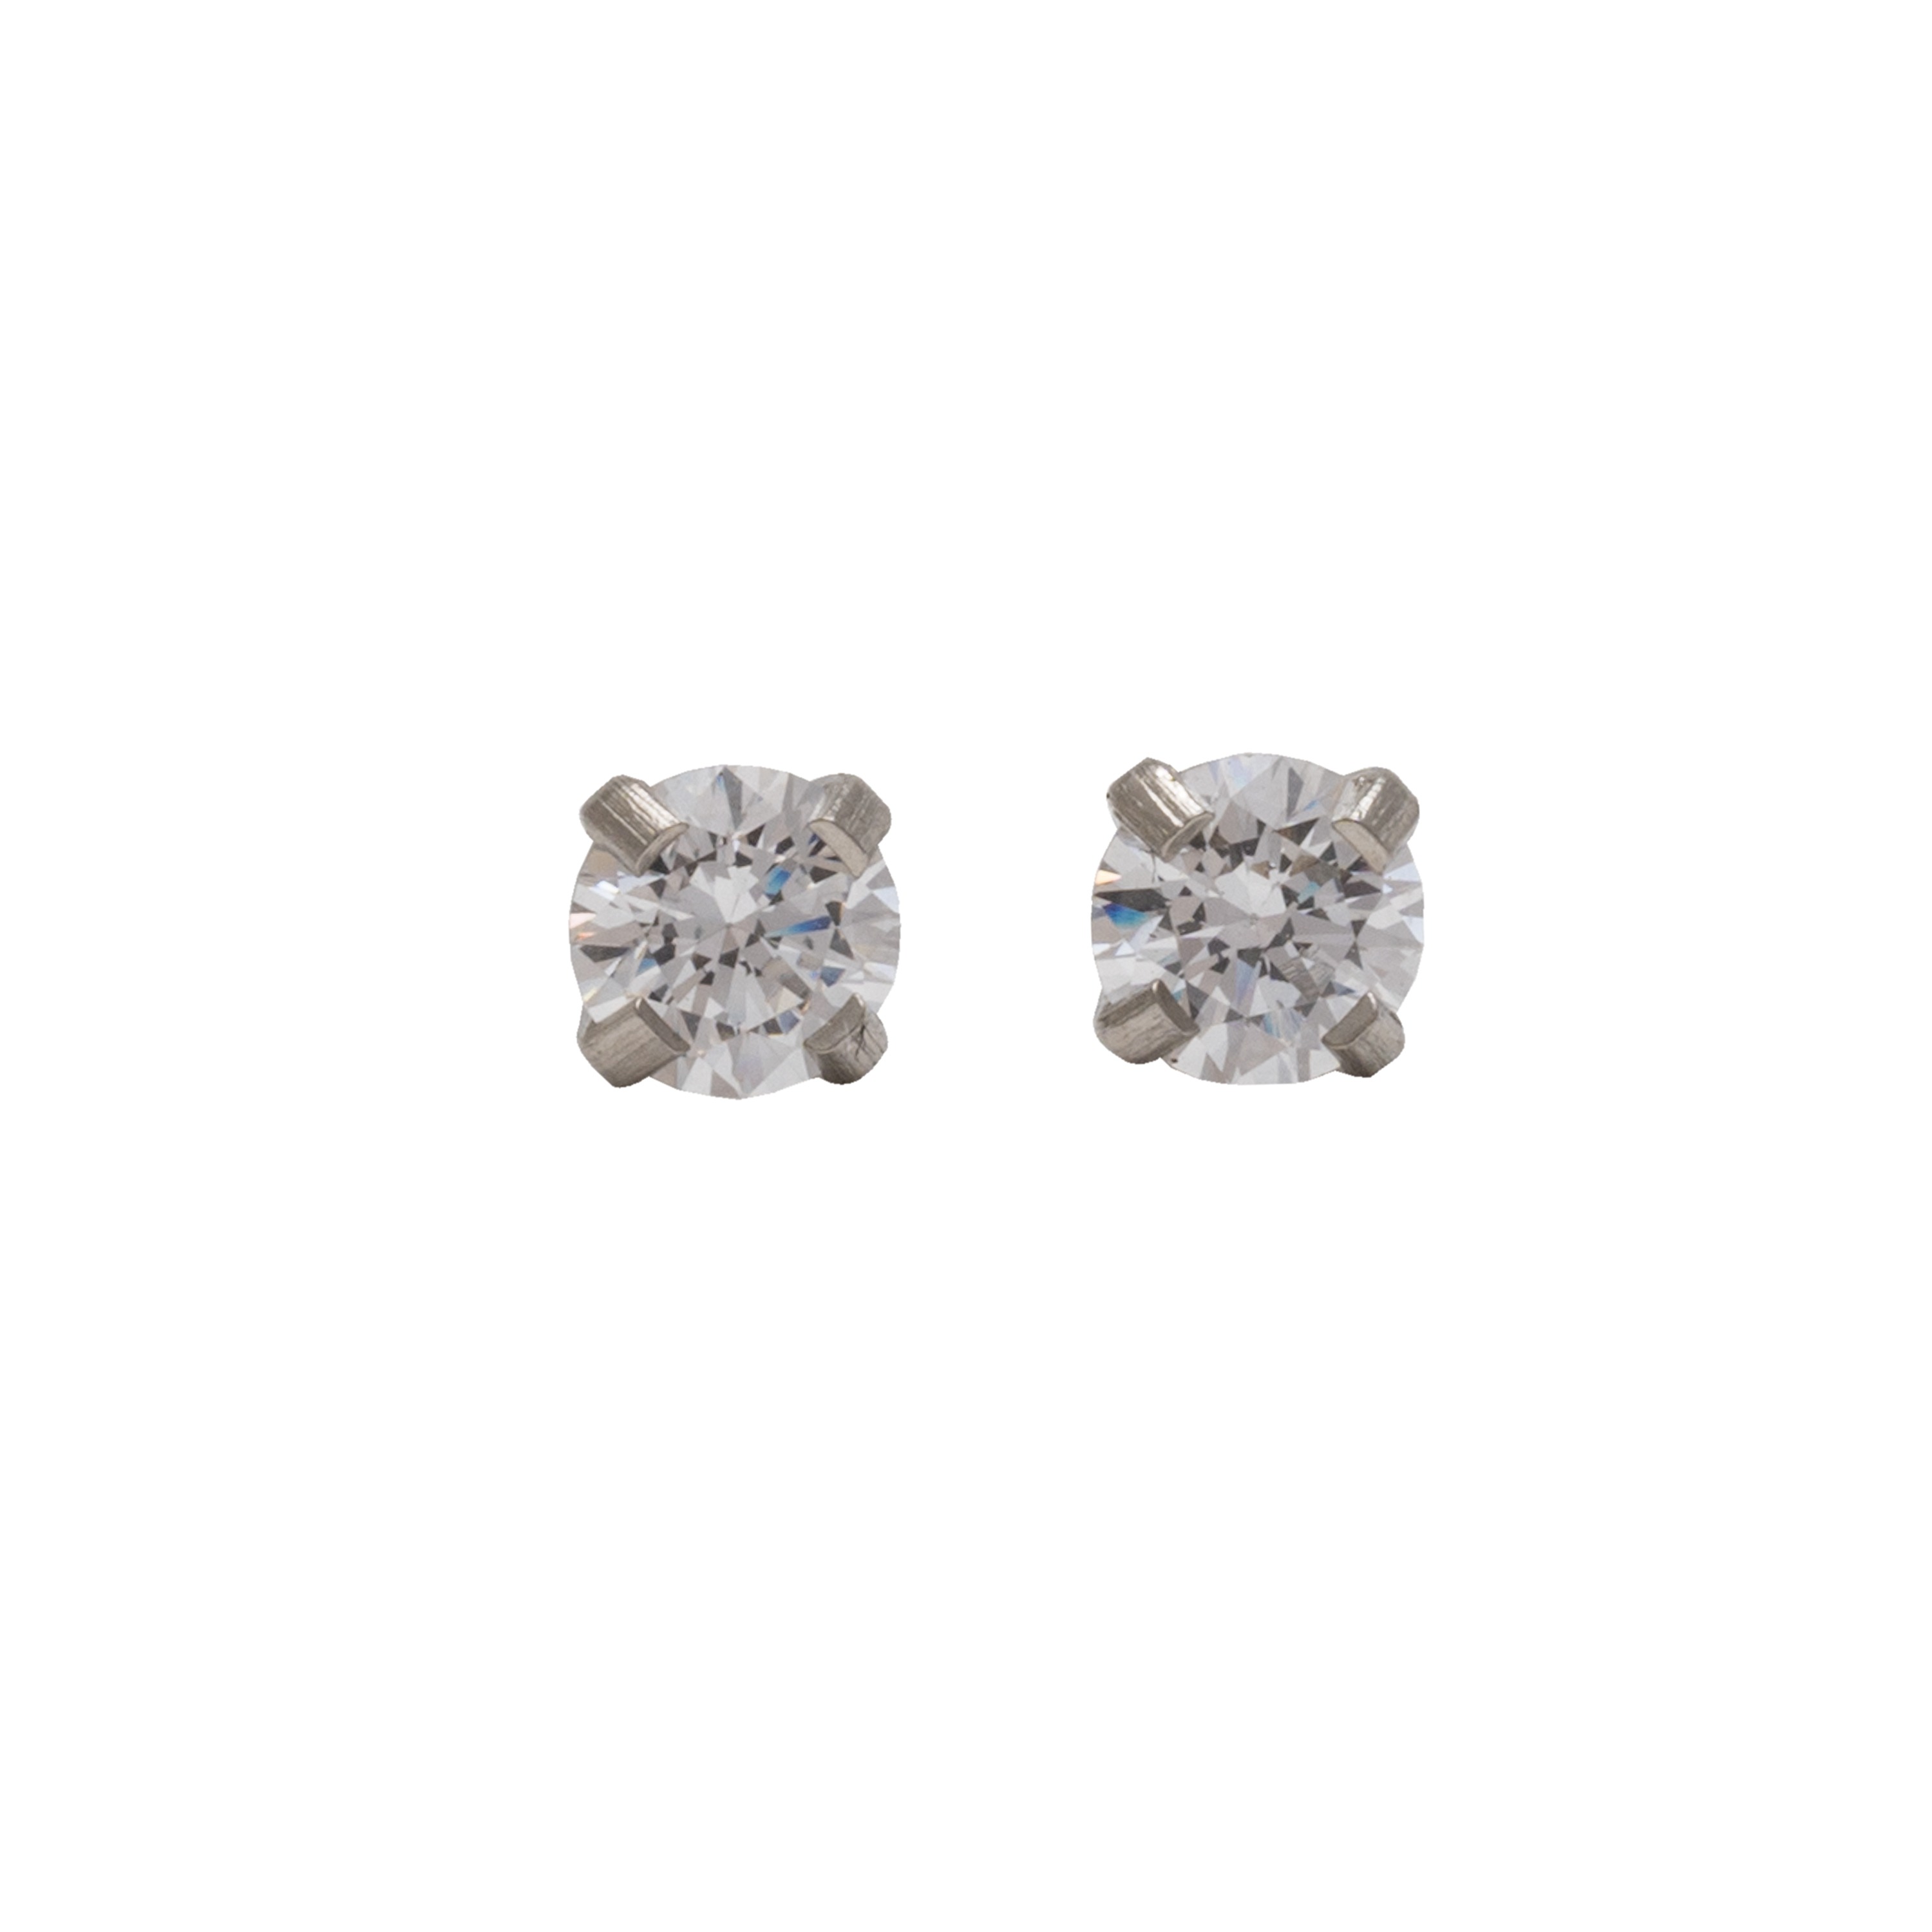 3MM - Cubic Zirconia (Round) - Crystal Clear | Stainless Steel Simple Yet Stylish, Cute & Trending Fashion Earrings / Ear Studs for Girls & Women Online @ Pakistan | Studex Sensitive (for daily wear)